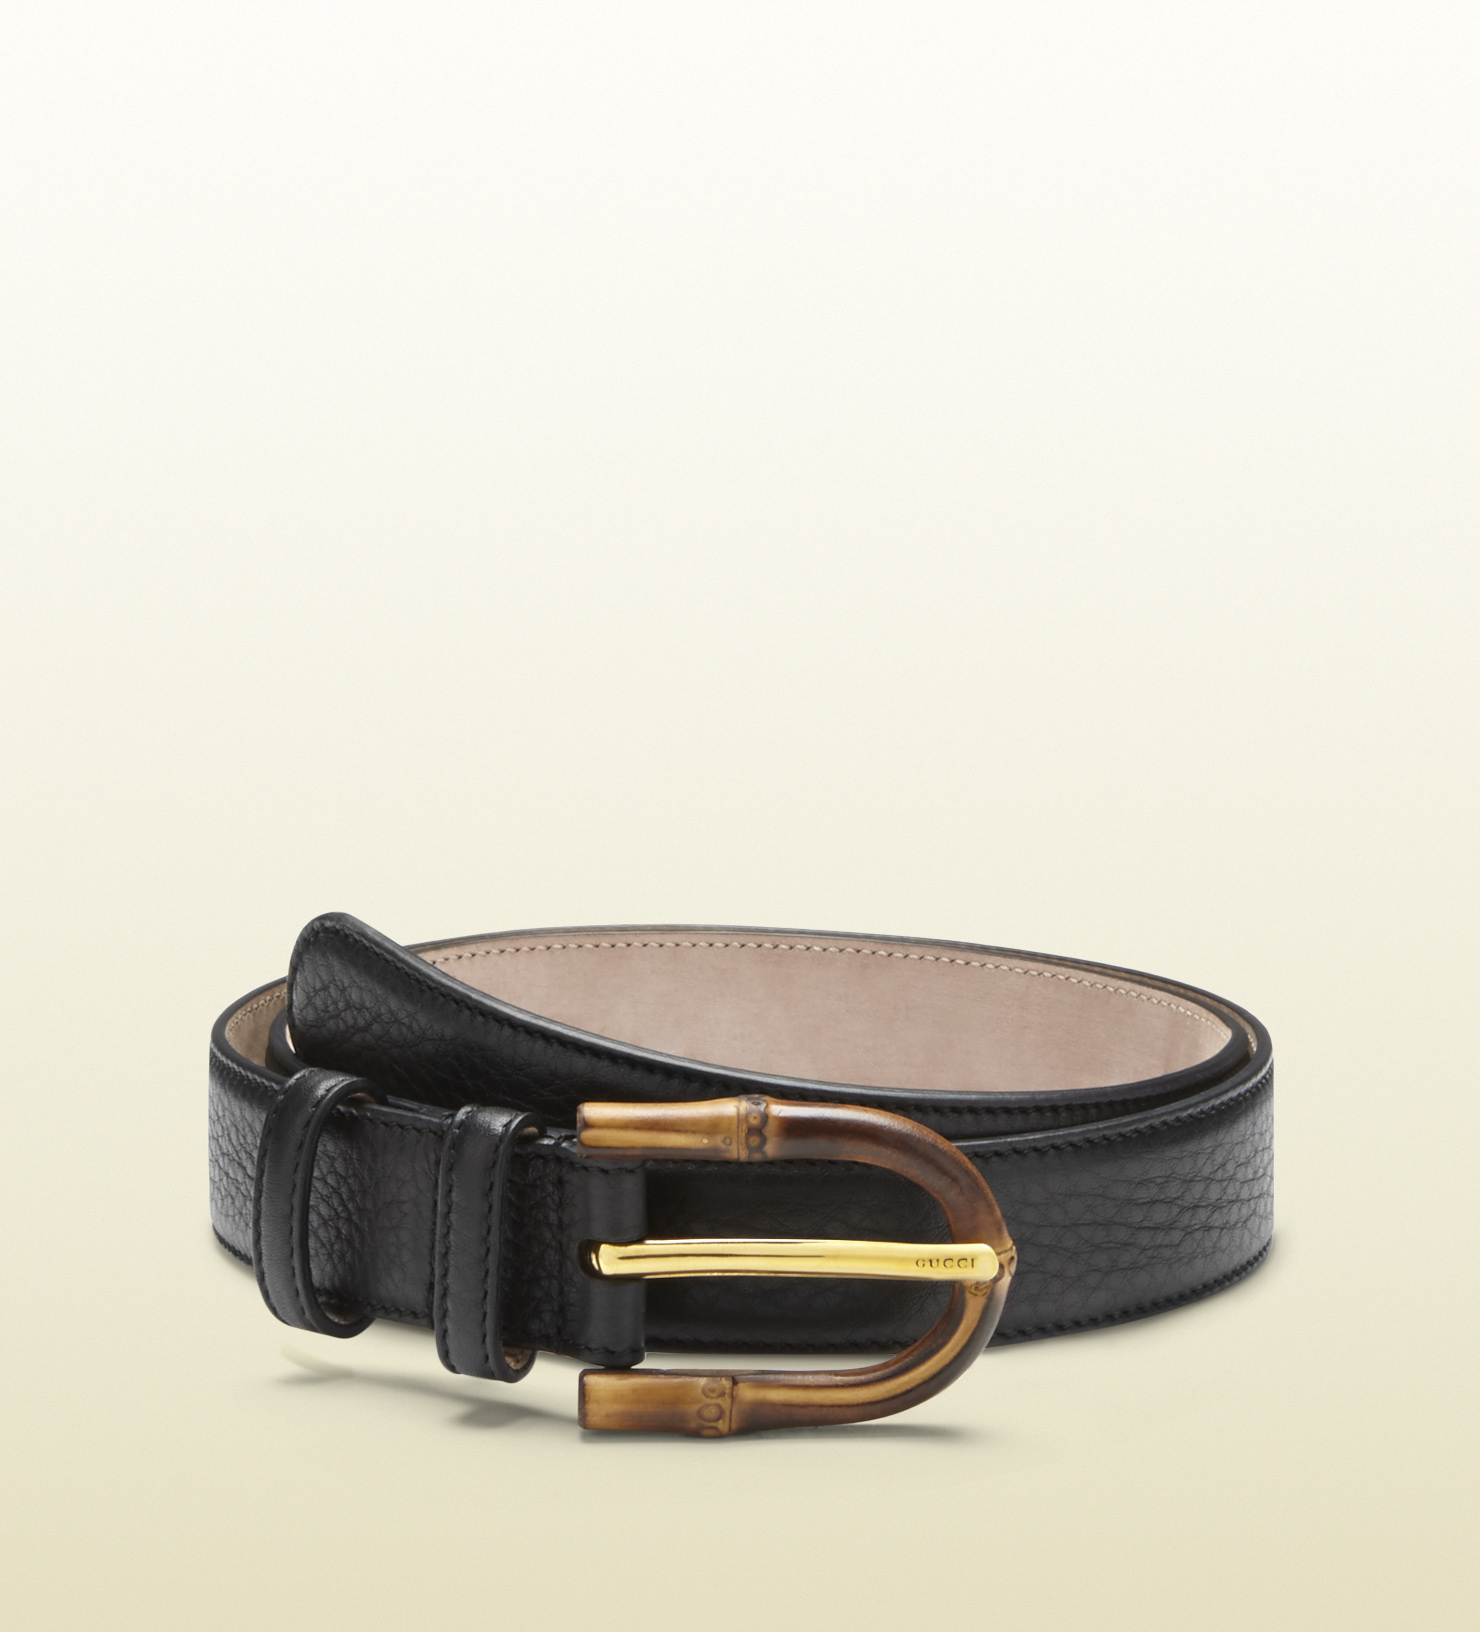 Gucci Black Leather Belt With Bamboo Buckle for Men - Lyst